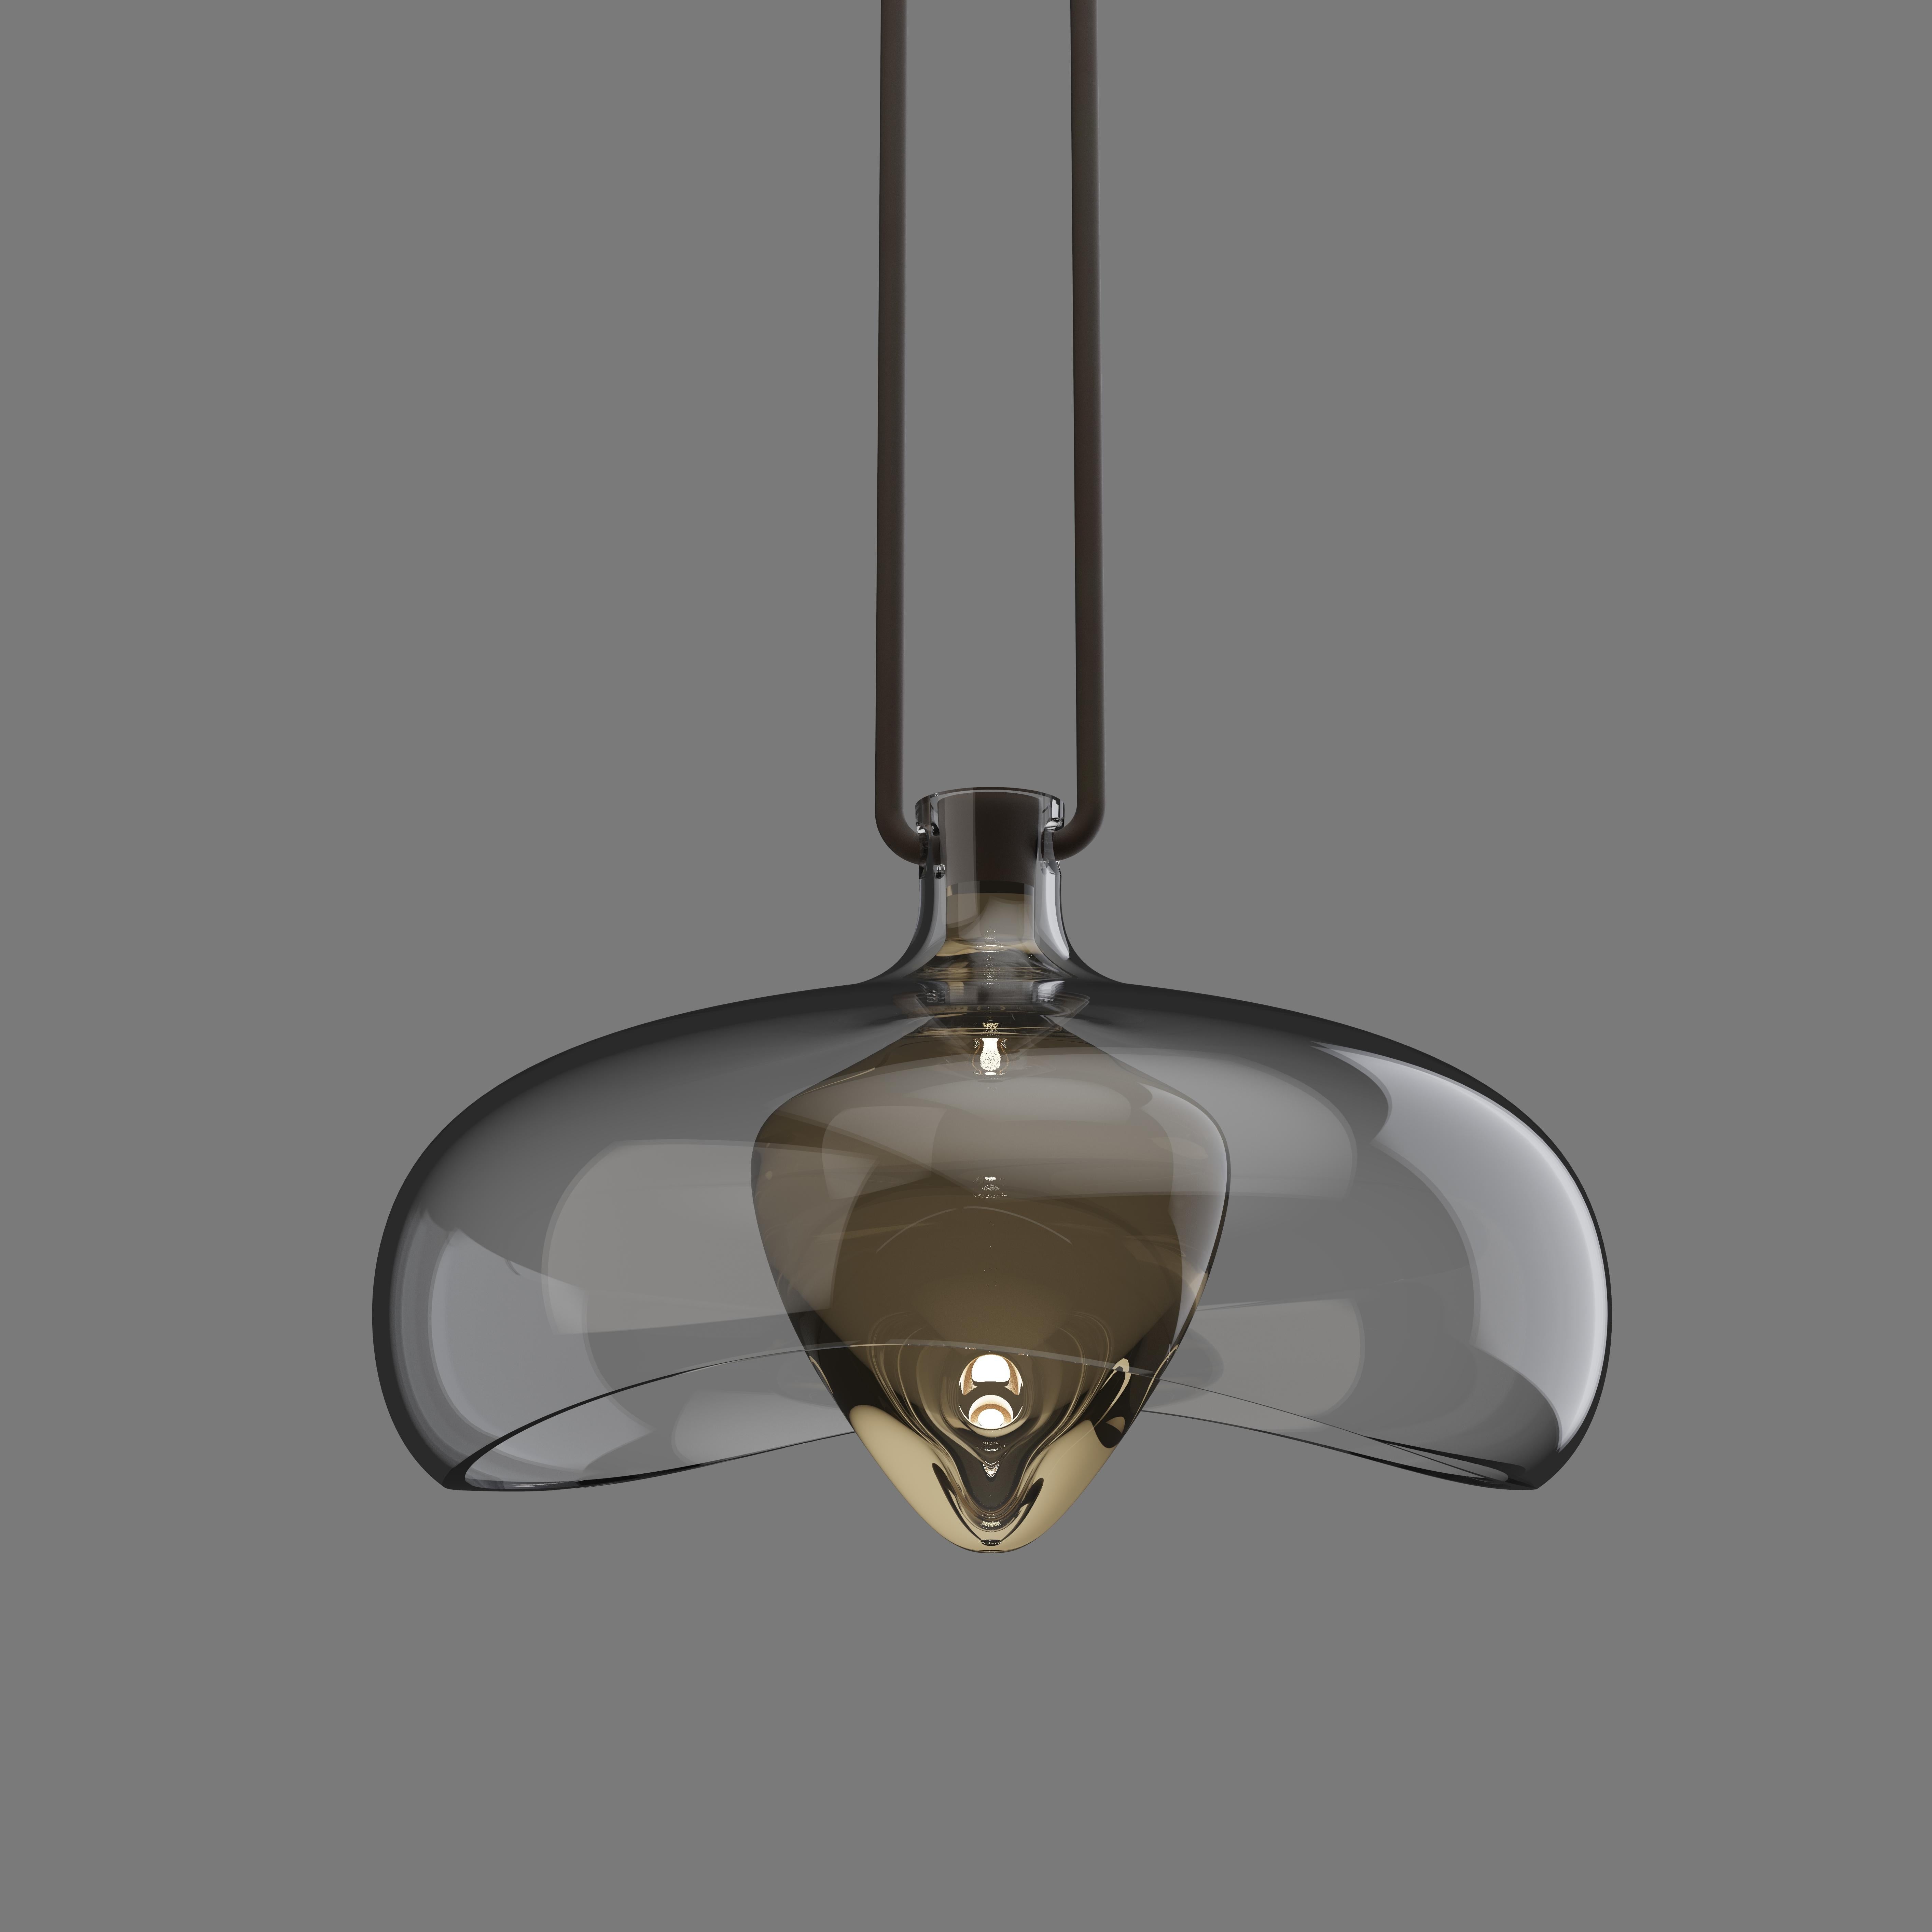 Pendant in dark bronze finish with decorative solid gold glass and clear glass bowl. 

Overall Dia: 399mm 
Glass Shade Height: 230mm 
Integrated LED, 2700k

Made to order to buyer's specification. Variations to dimensions and finishes can be made on